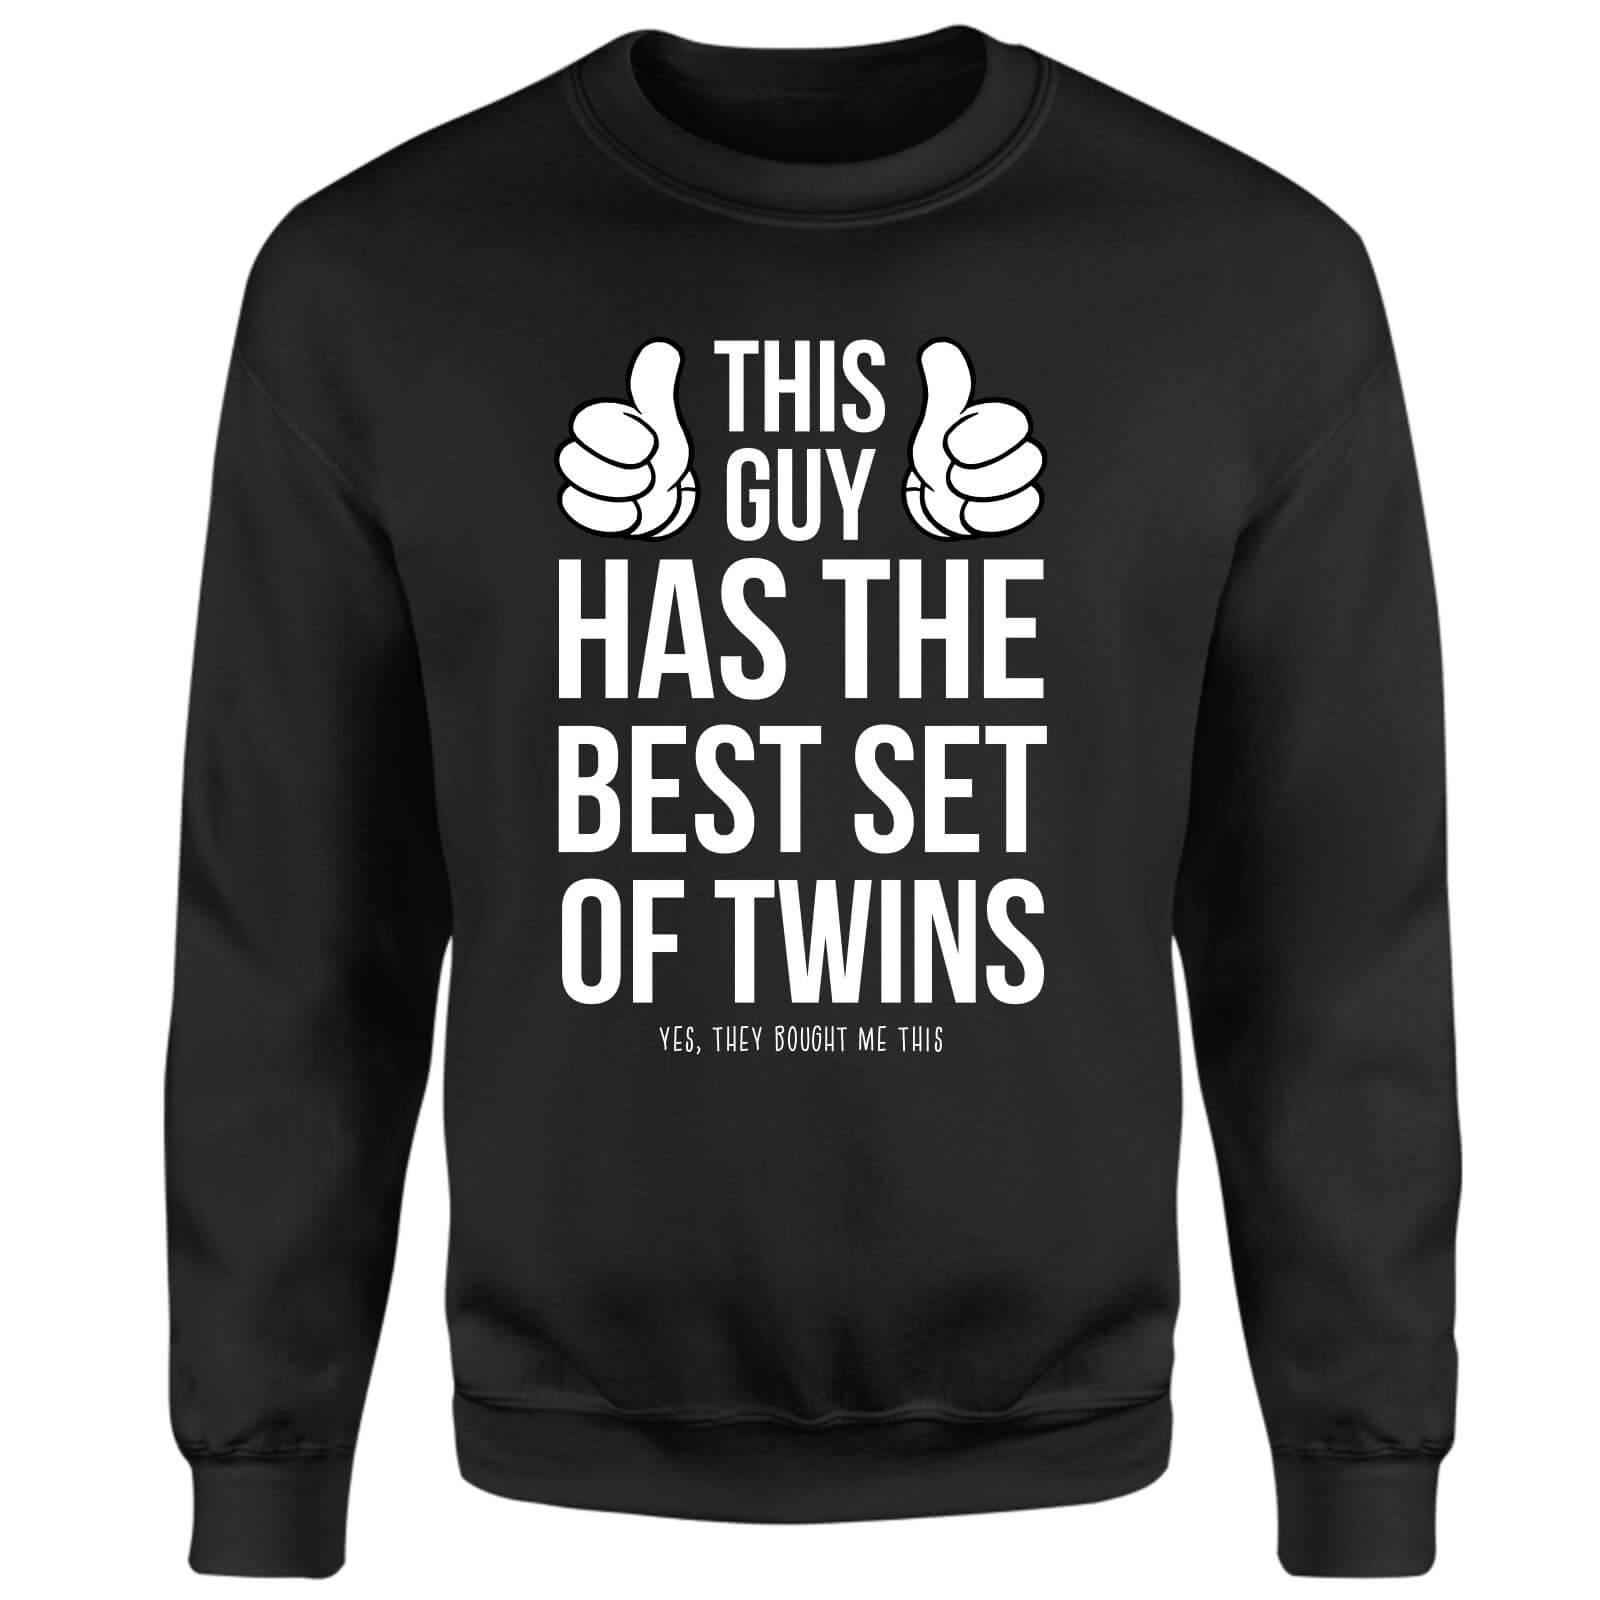 This Guy Has The Best Twins Yes They Brought Me This Sweatshirt - Black - Xxl